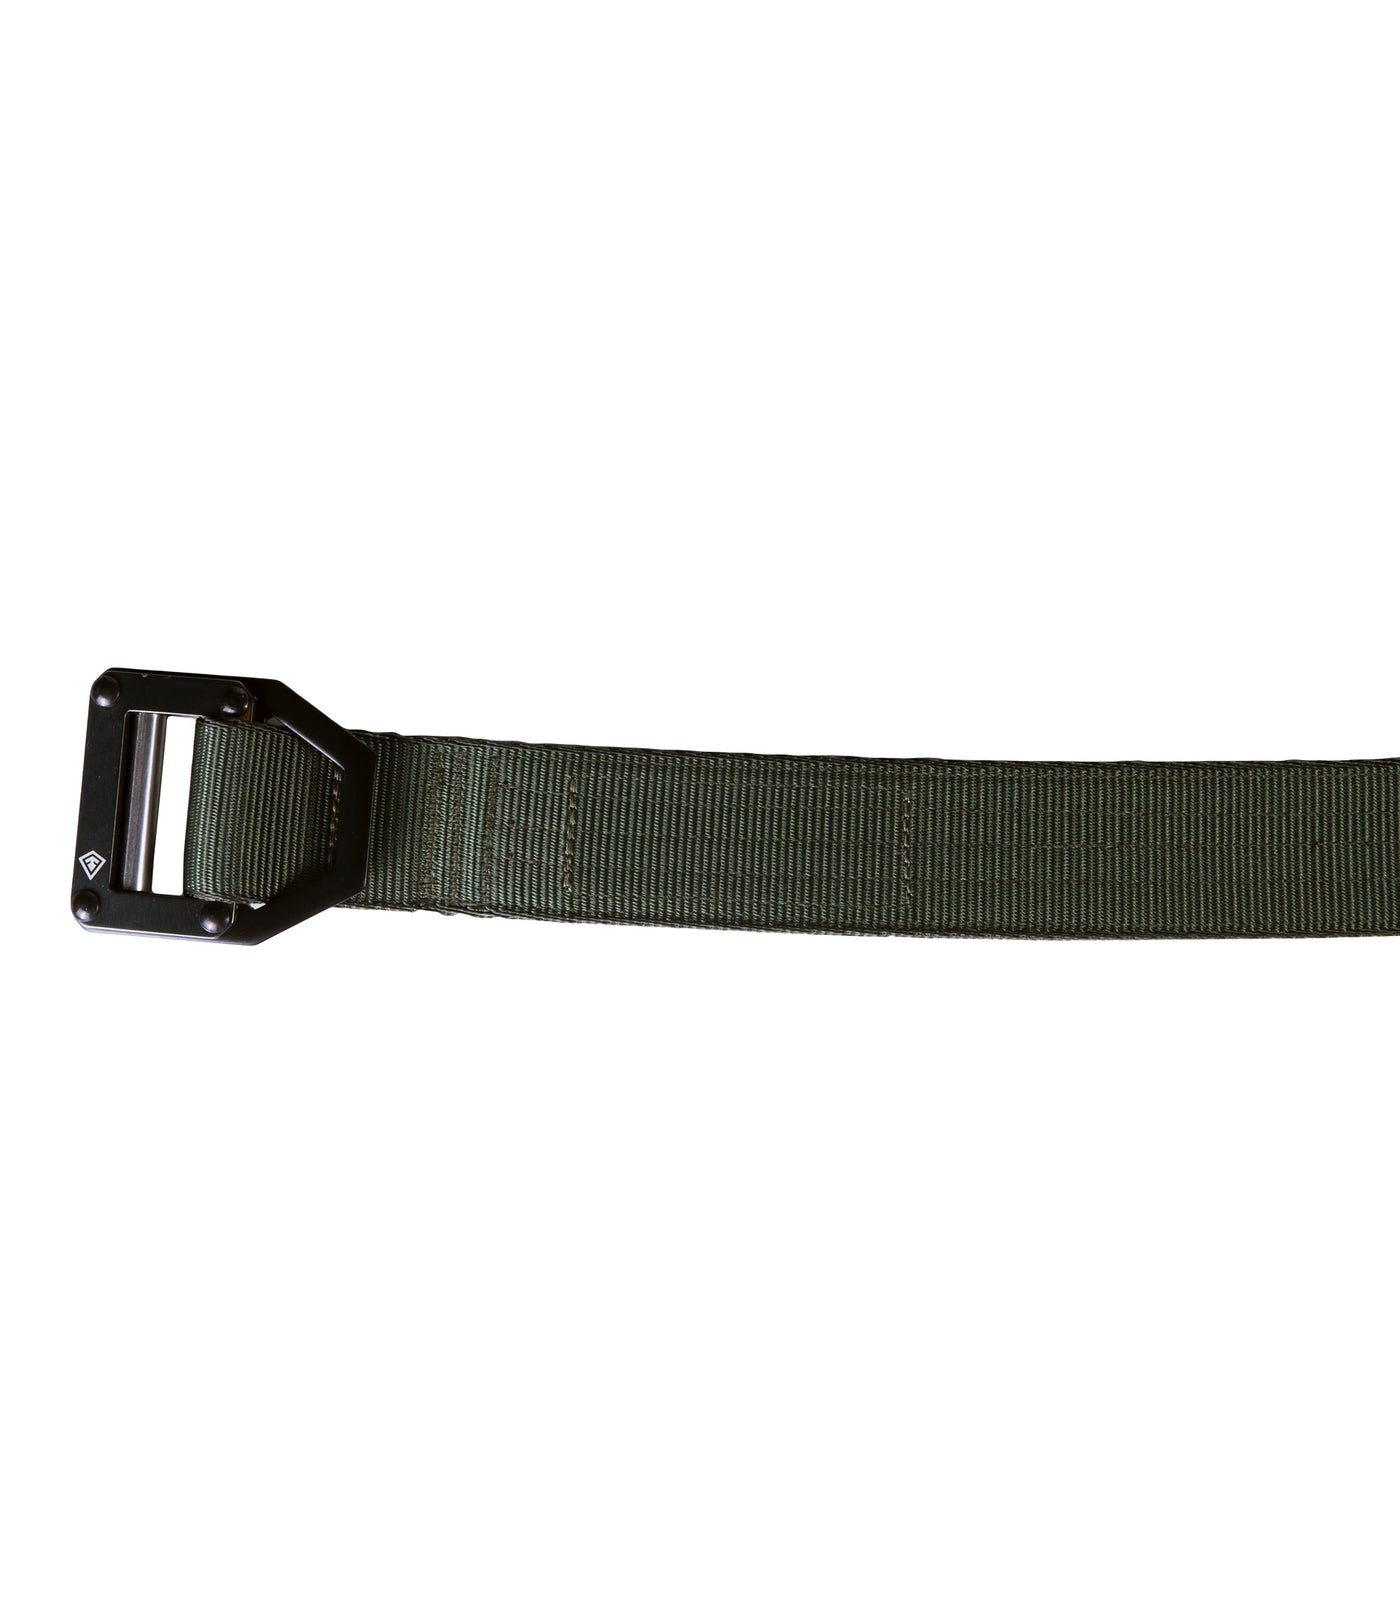 Front of Tactical Belt 1.5” in OD Green